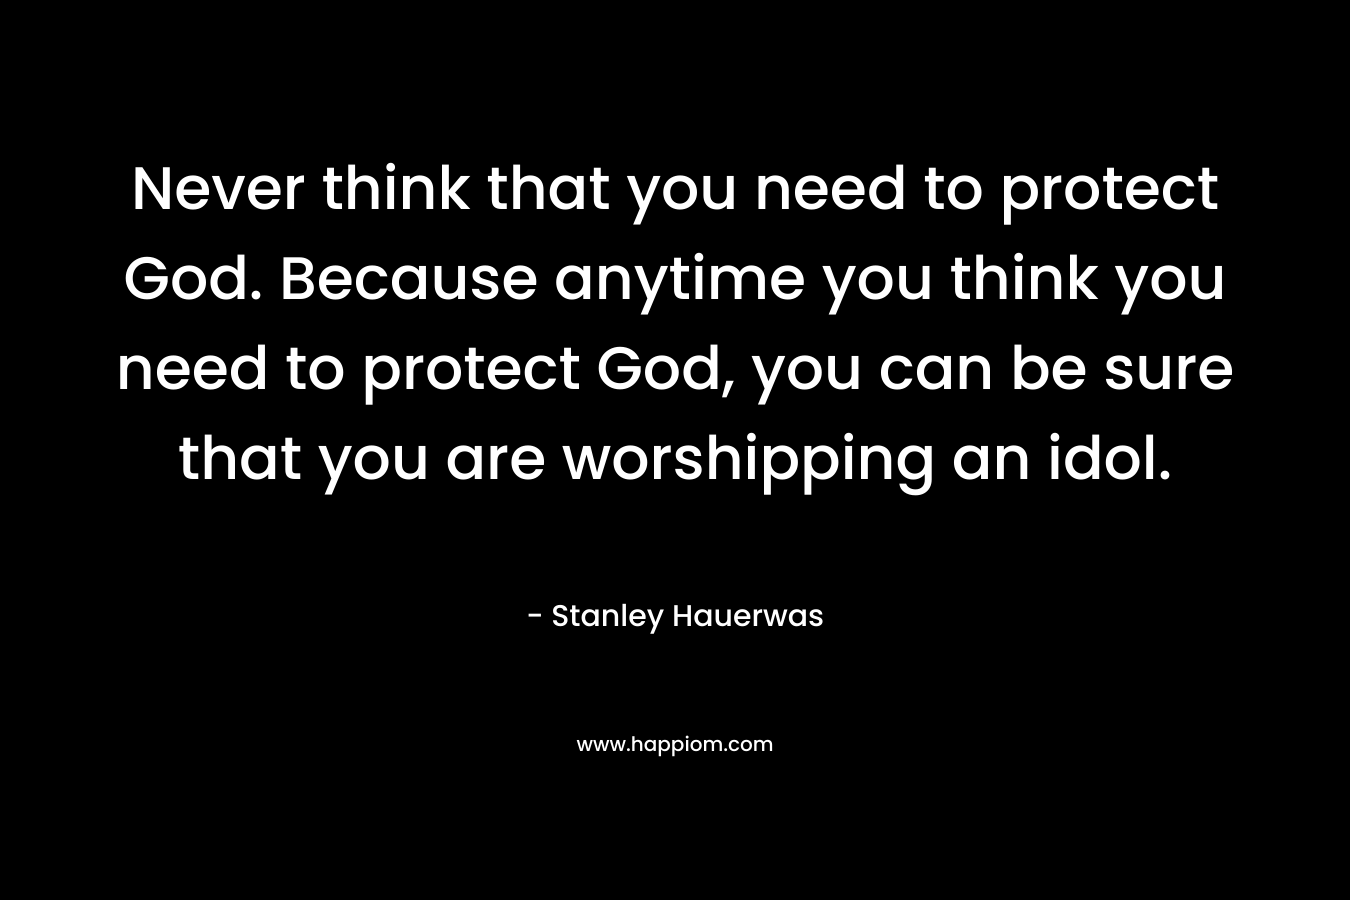 Never think that you need to protect God. Because anytime you think you need to protect God, you can be sure that you are worshipping an idol. – Stanley Hauerwas